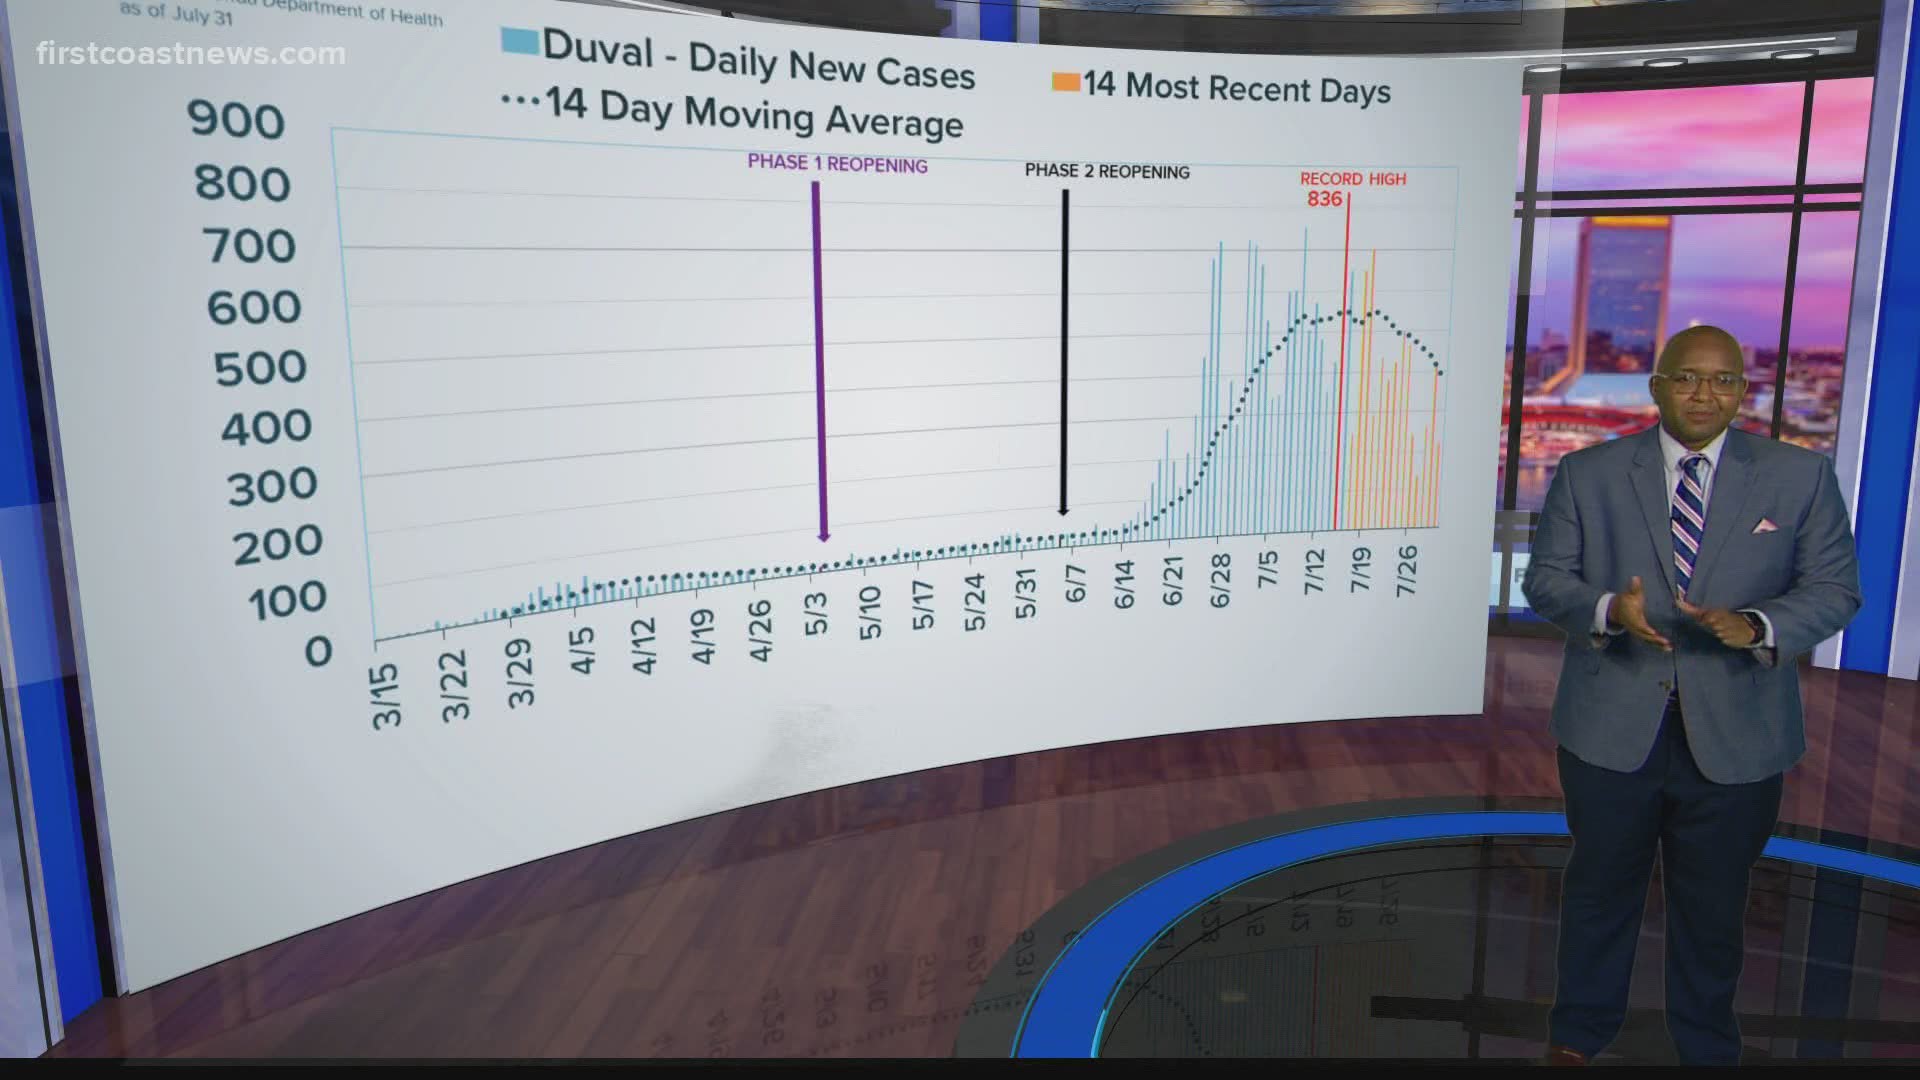 The overall trend for new coronavirus cases is starting to see a downward trend after record highs during the beginning of the month.